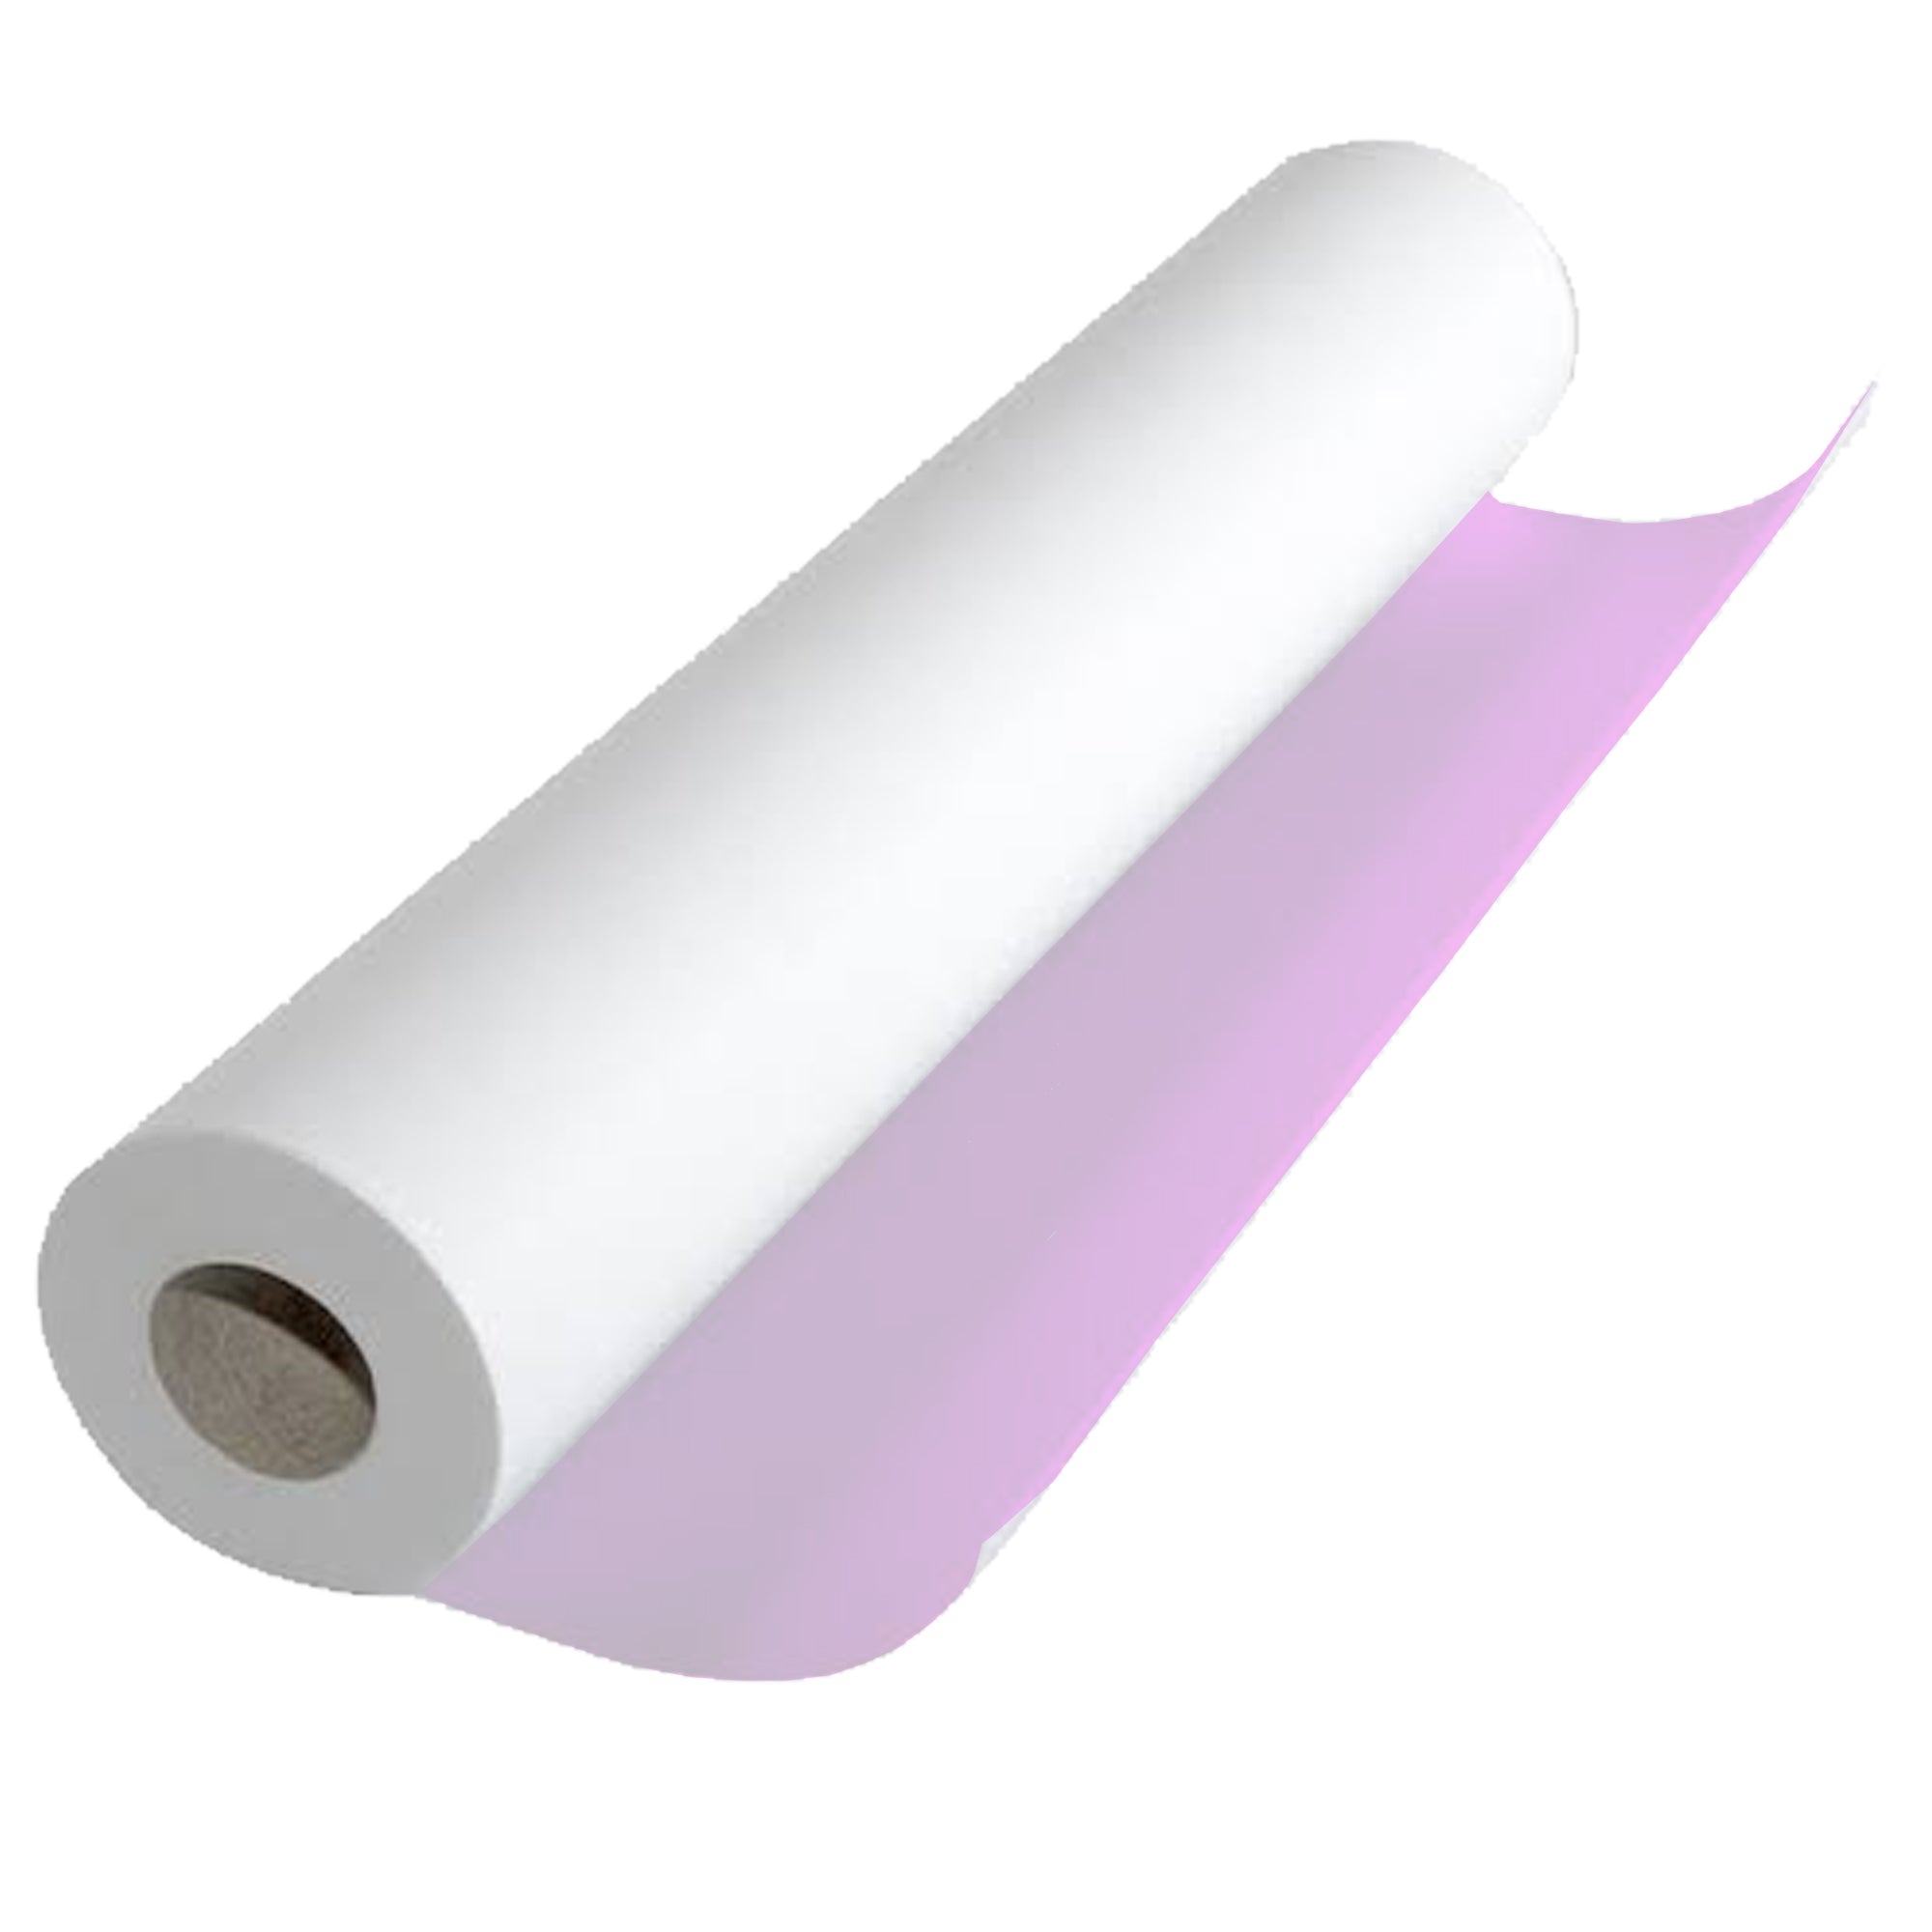 Sublimation Pattern Paper Modern Crack Series (4 Design Options) Roll Size 15 in x 40 ft 15 in x 40 ft / Purple Ripple / Hydro Transfer Paper 30 Gram